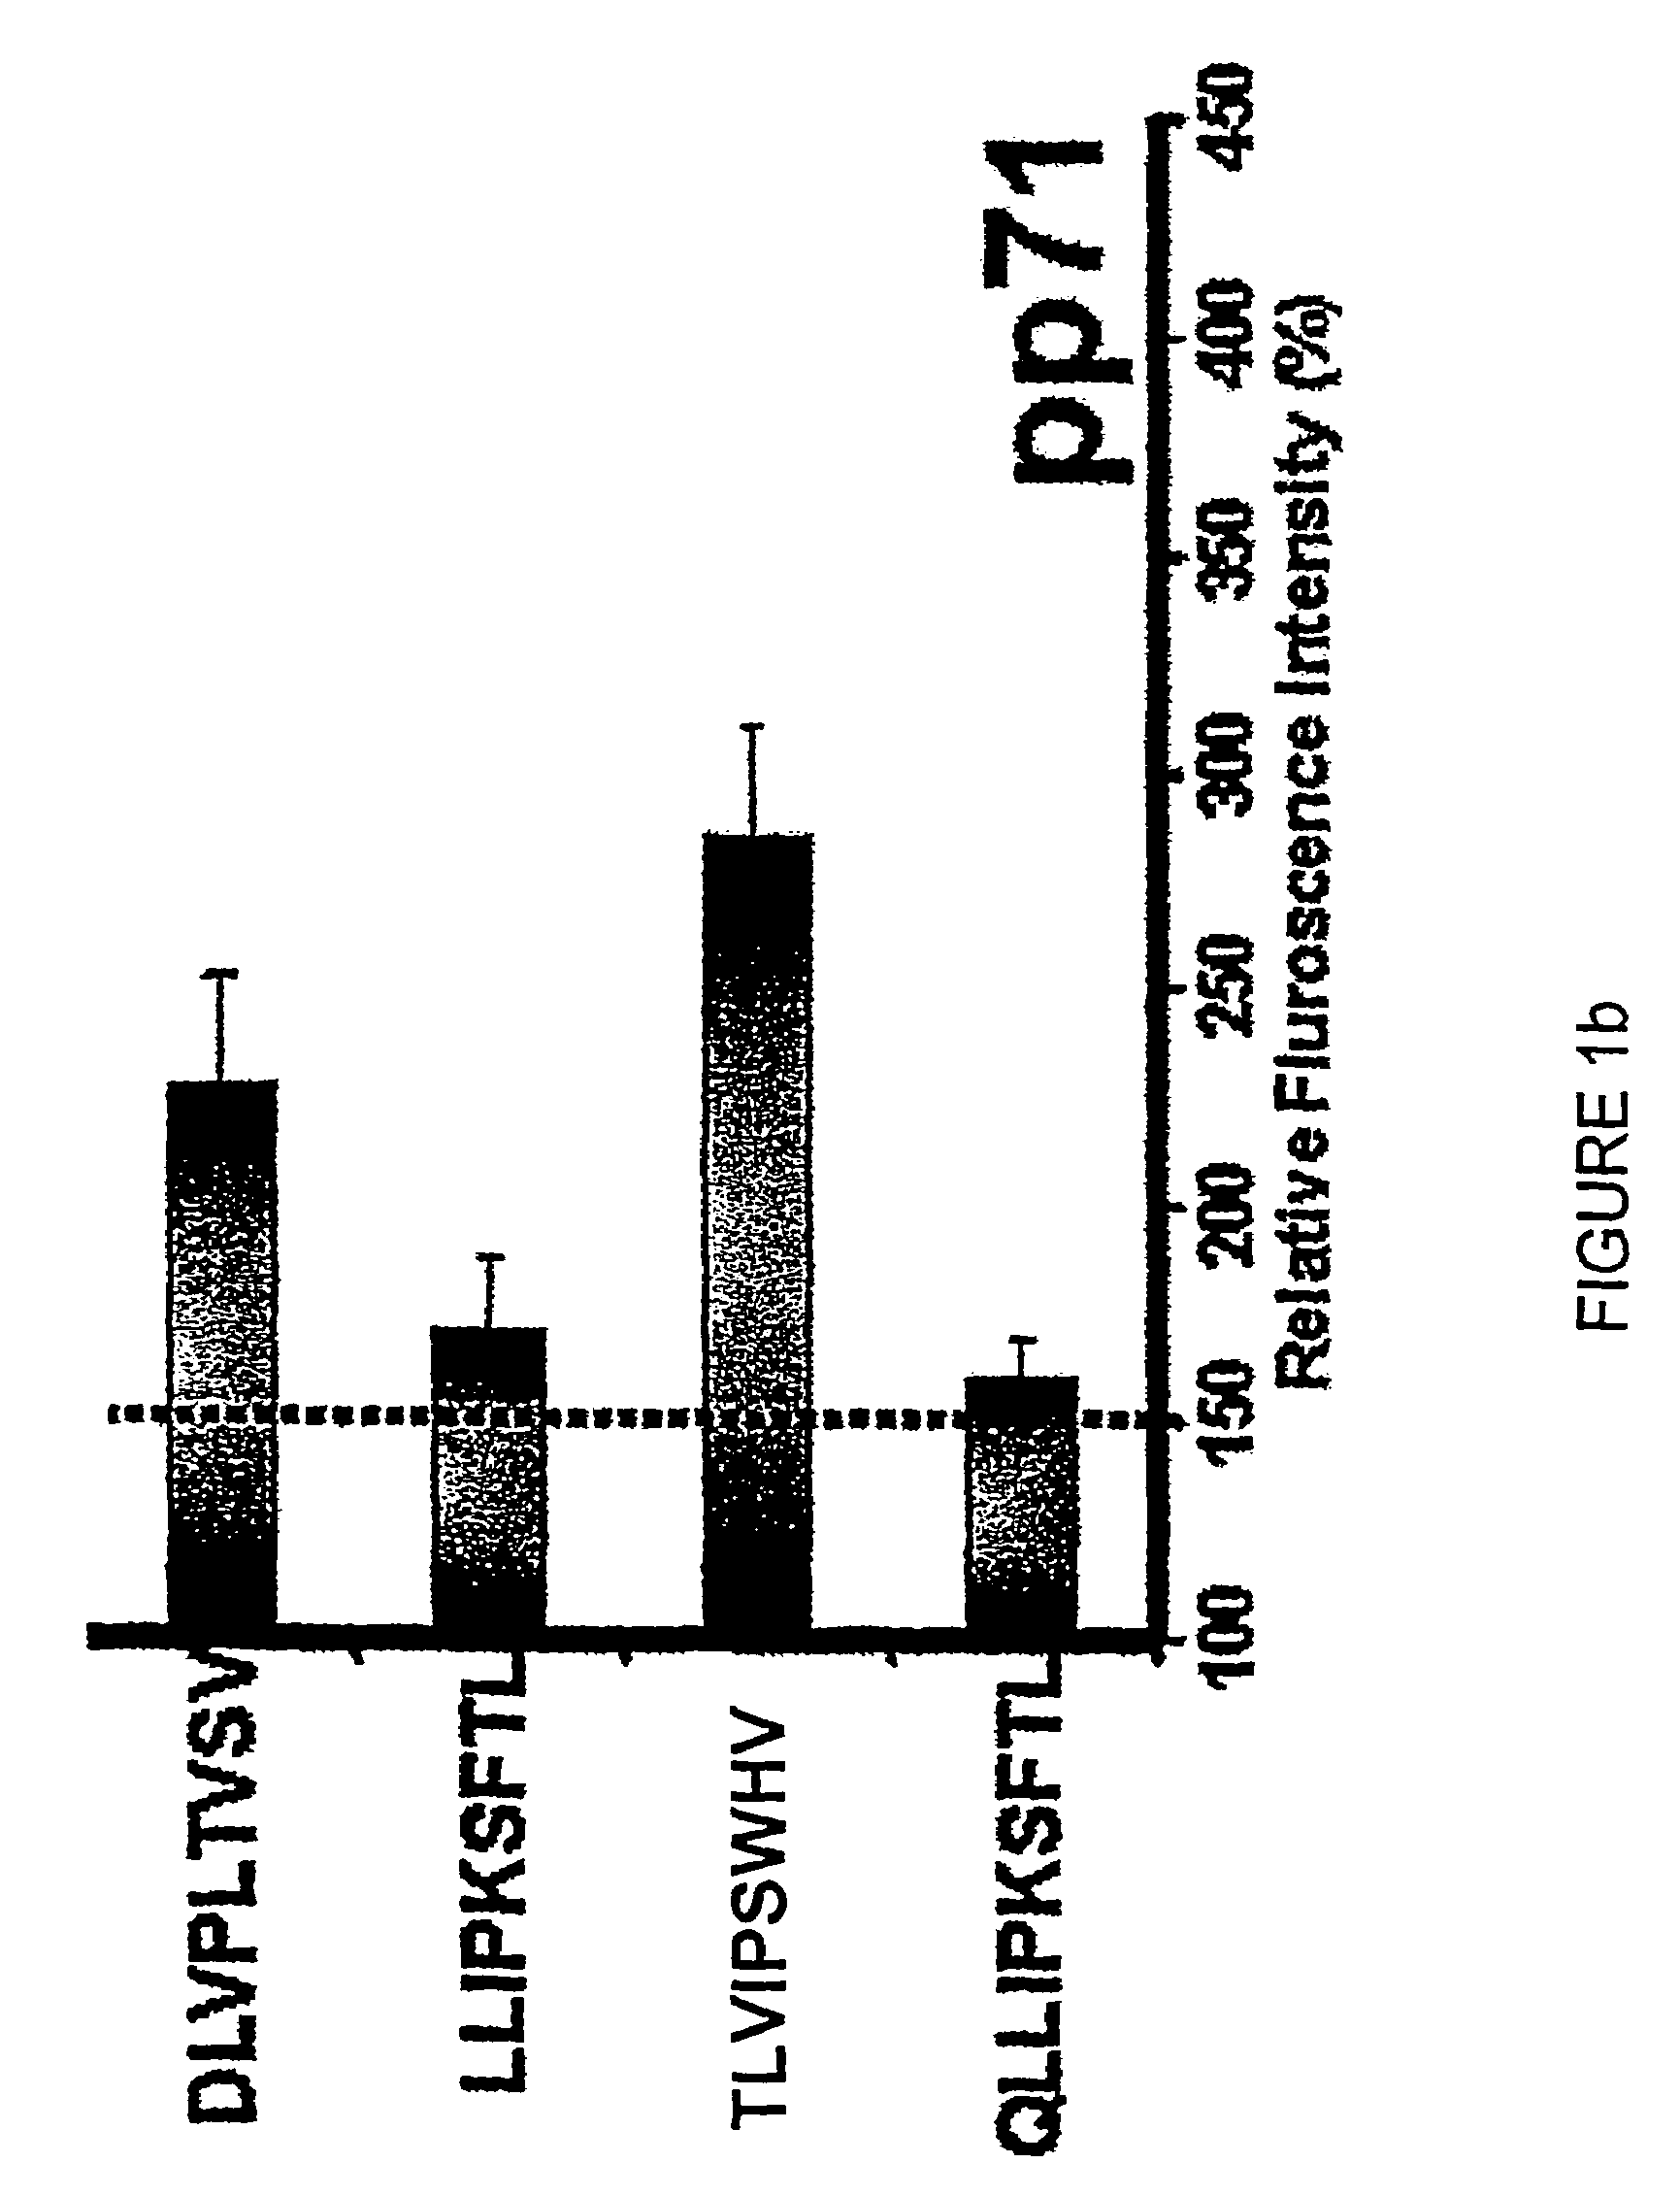 Human cytomegalovirus (HCMV) cytotoxic T cell epitopes, polyepitopes compositions comprising same and diagnostic and prophylactic and therapeutic uses therefor